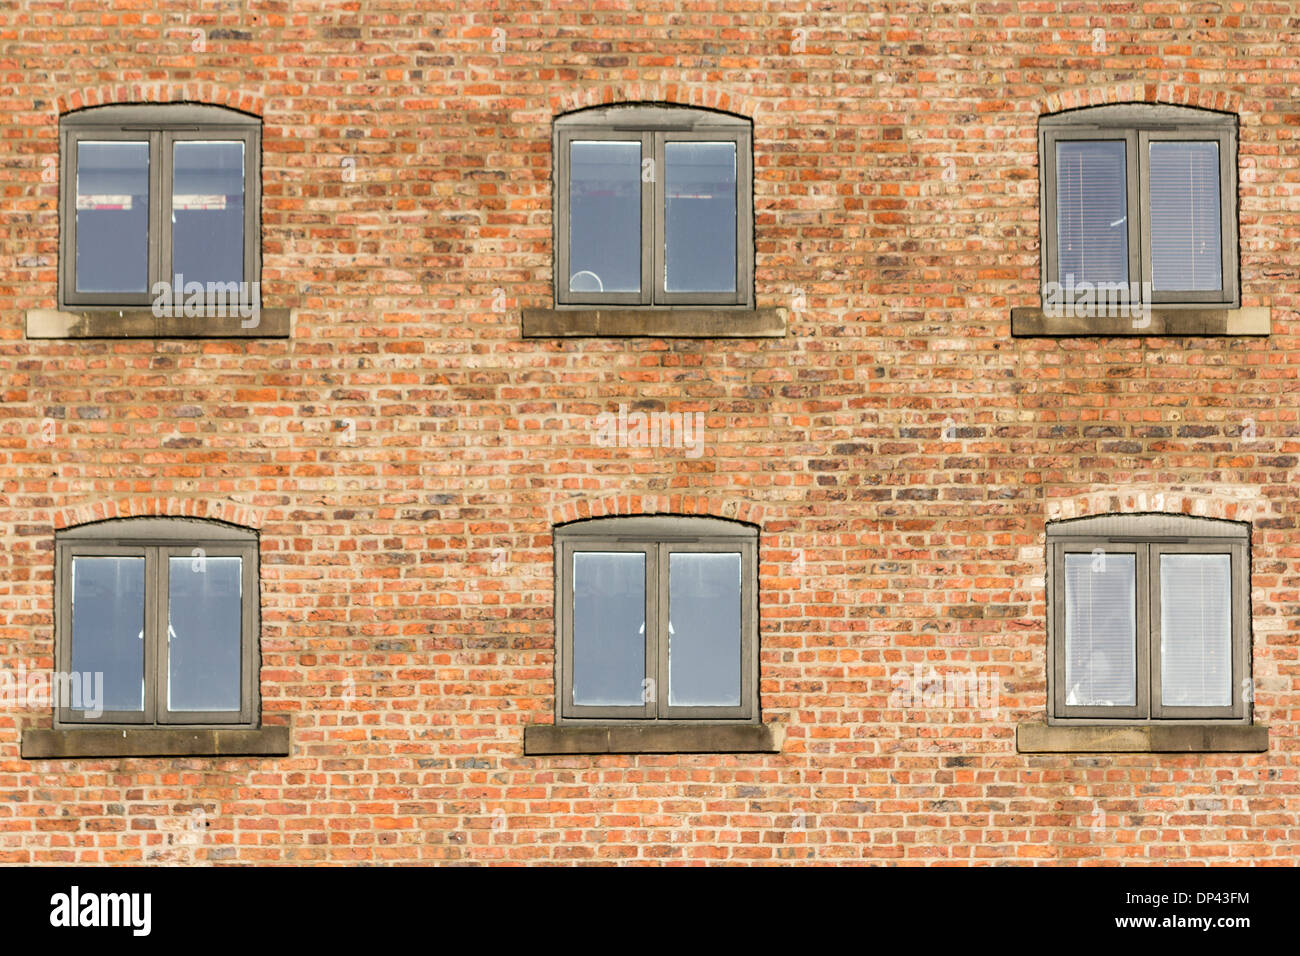 Brick wall and windows of one of the historic buildings in Newcastle Upon Tyne Stock Photo